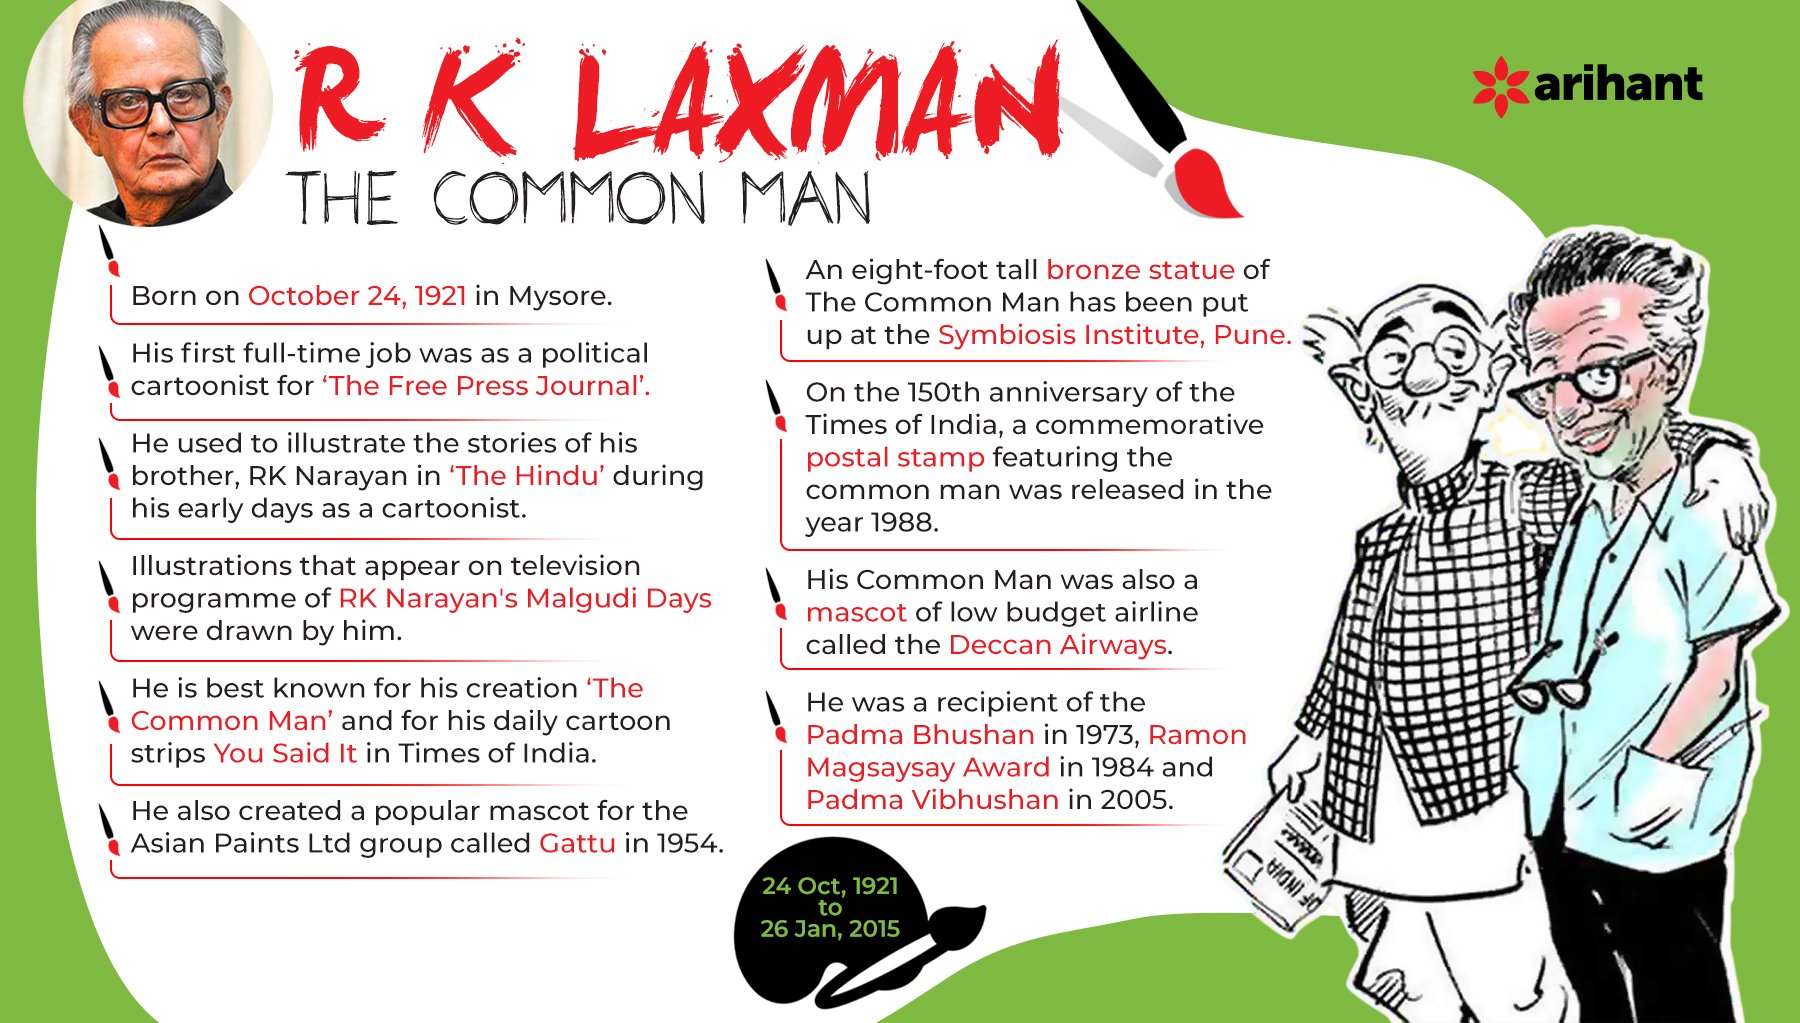 Arihant Publication auf Twitter: „#HappyBirthAnniversary #RKLaxman # CommonMan #Cartoonist A humorist and illustrator with an uncommon talent,  . Laxman was one of India's most celebrated cartoonists. His daily  political cartoon, You Said It,